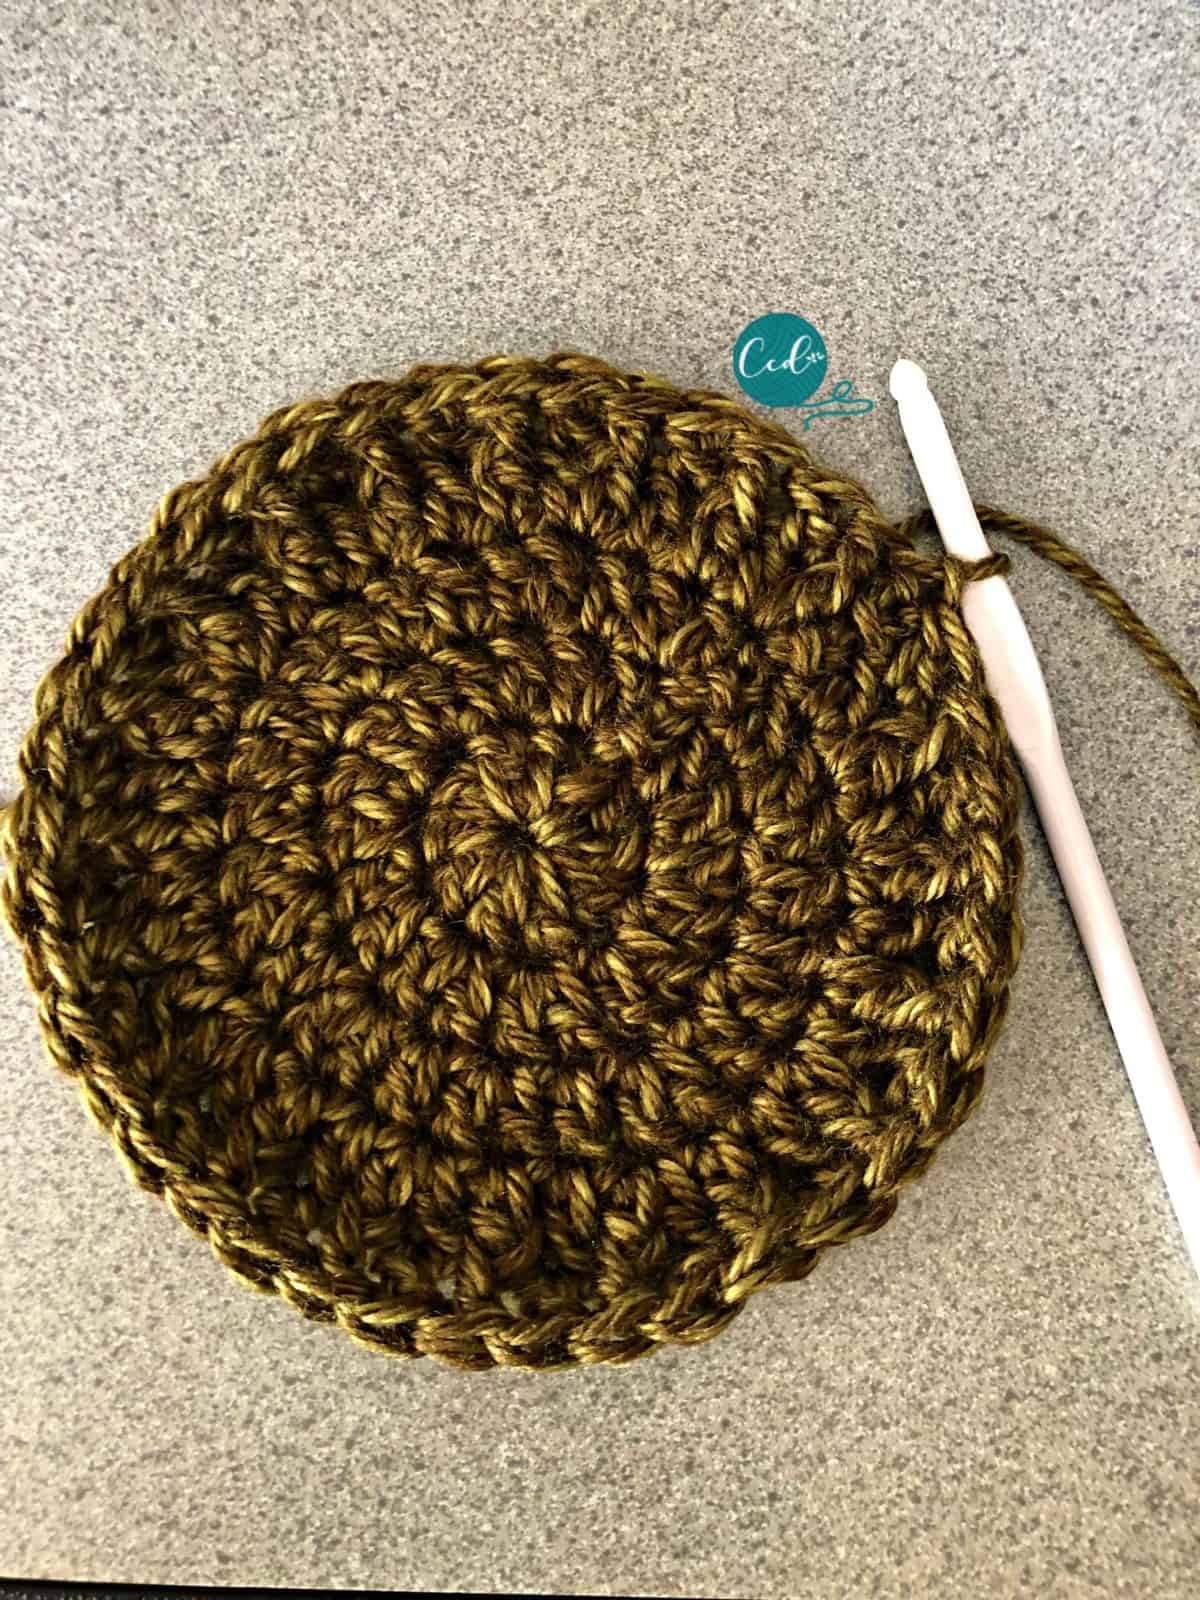 First rows of texture on crochet hat.